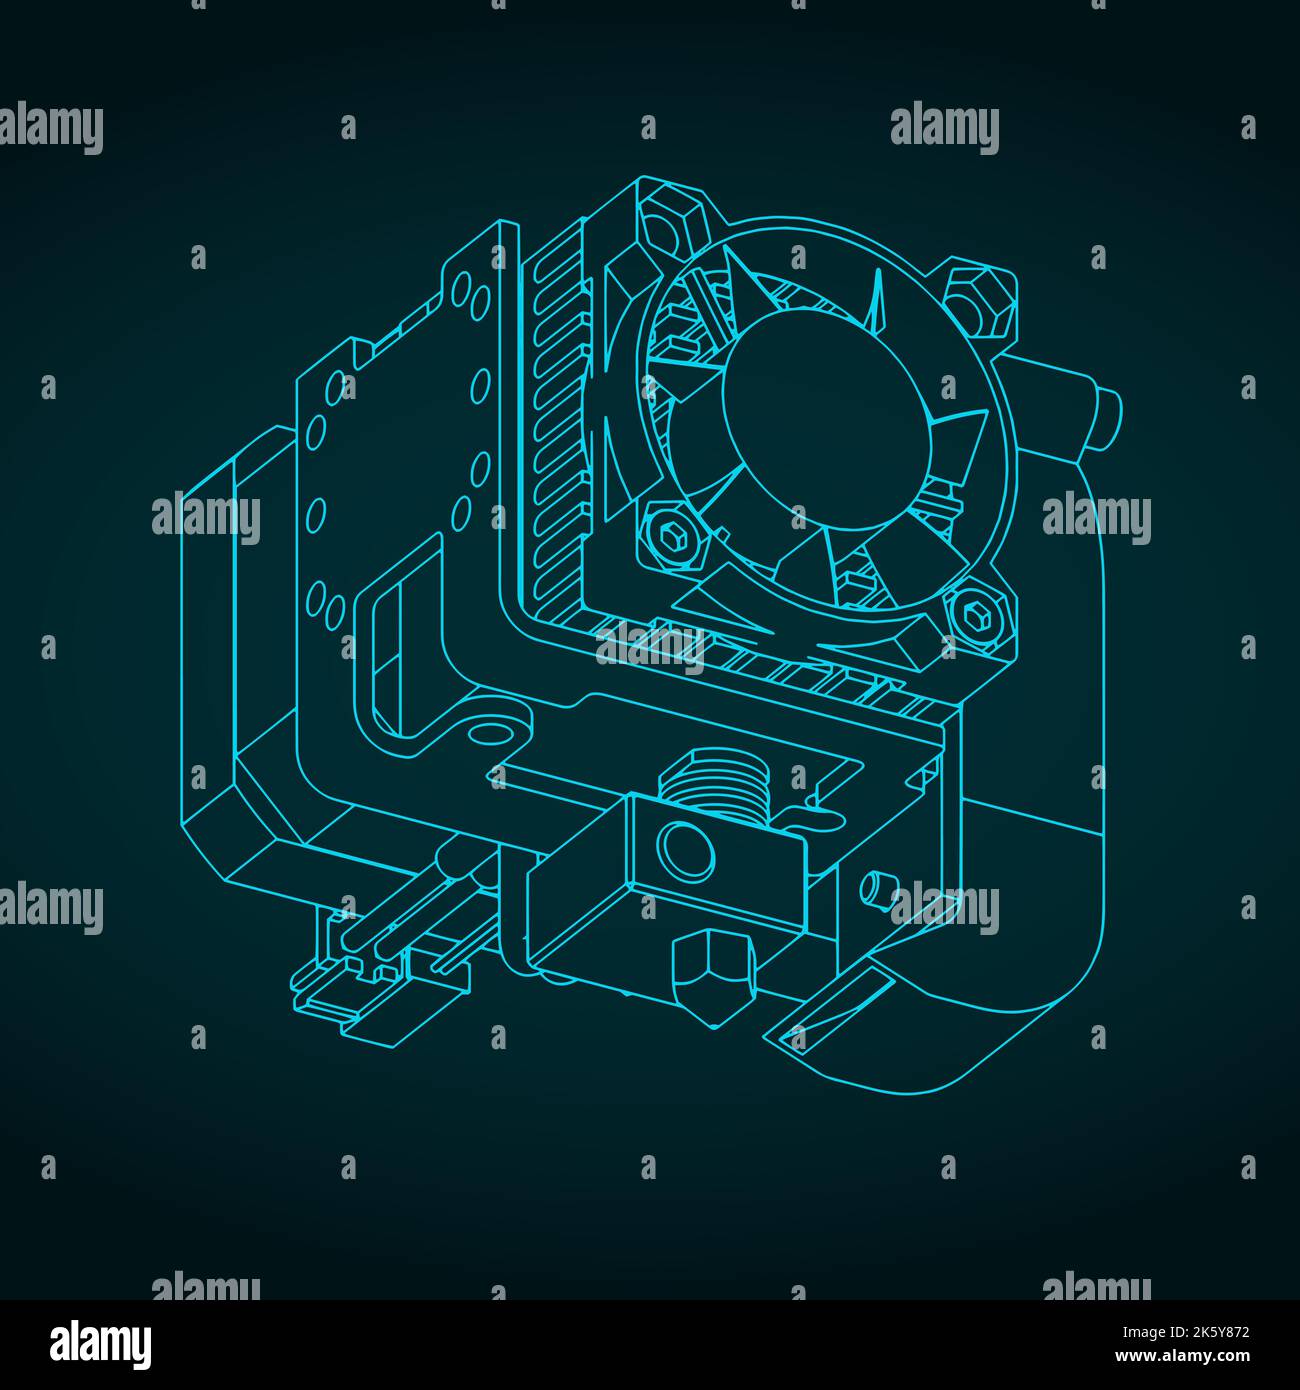 Stylized vector illustration of blueprint of 3d printer extruder Stock Vector